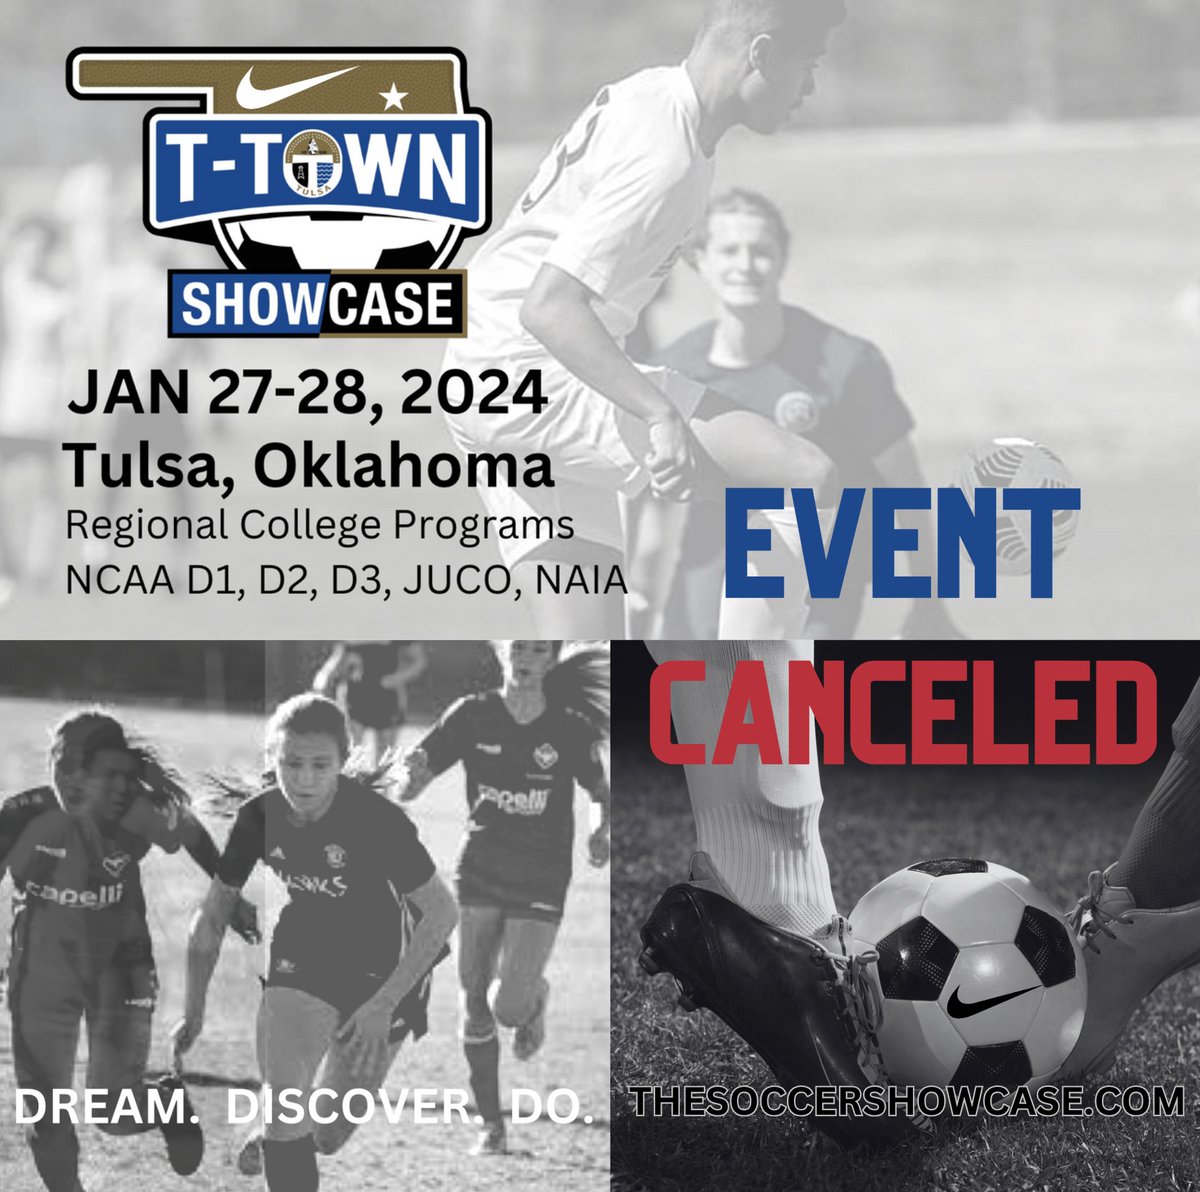 EVENT CANCELED - check club facebook and instagram, or team leaders check emails for more info. #ttownshowcase